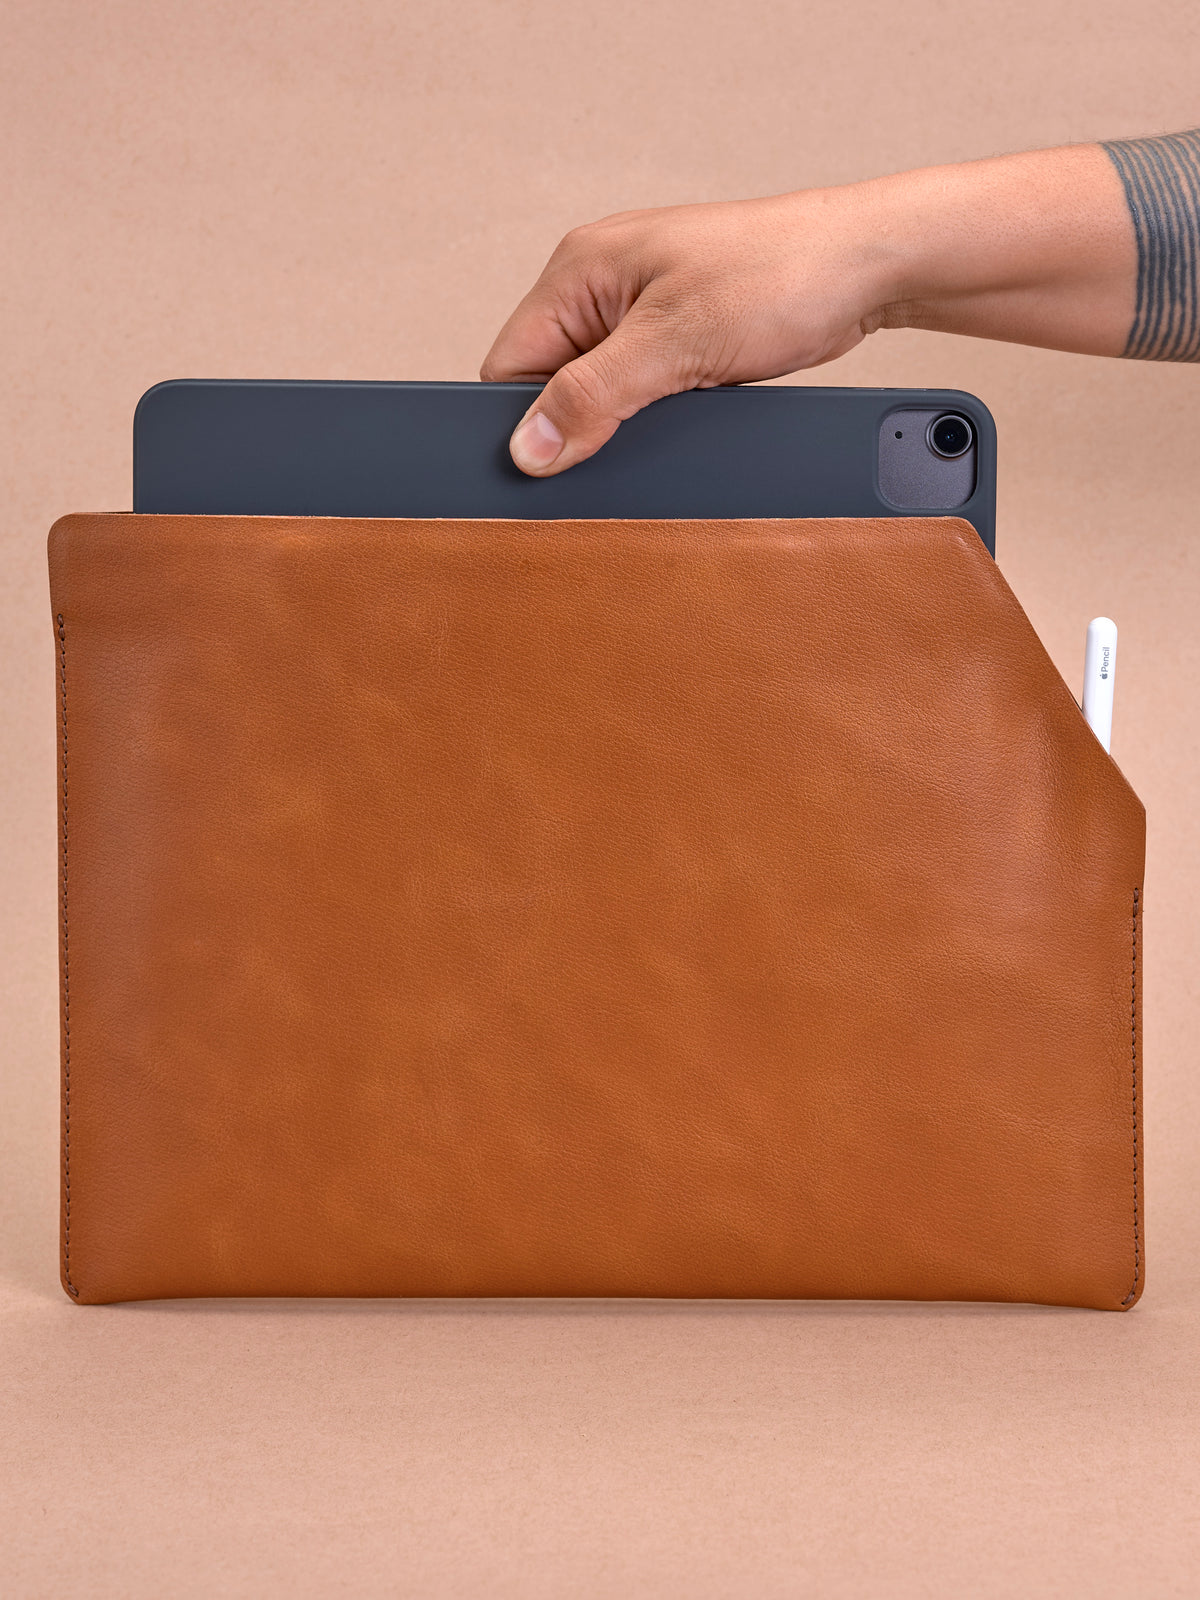 Apple accessories. Draftsman 7 iPad Sleeve Cover Tan, iPad Pro 11-inch, iPad Pro 12.9-inch, M1 Chip by Capra Leather